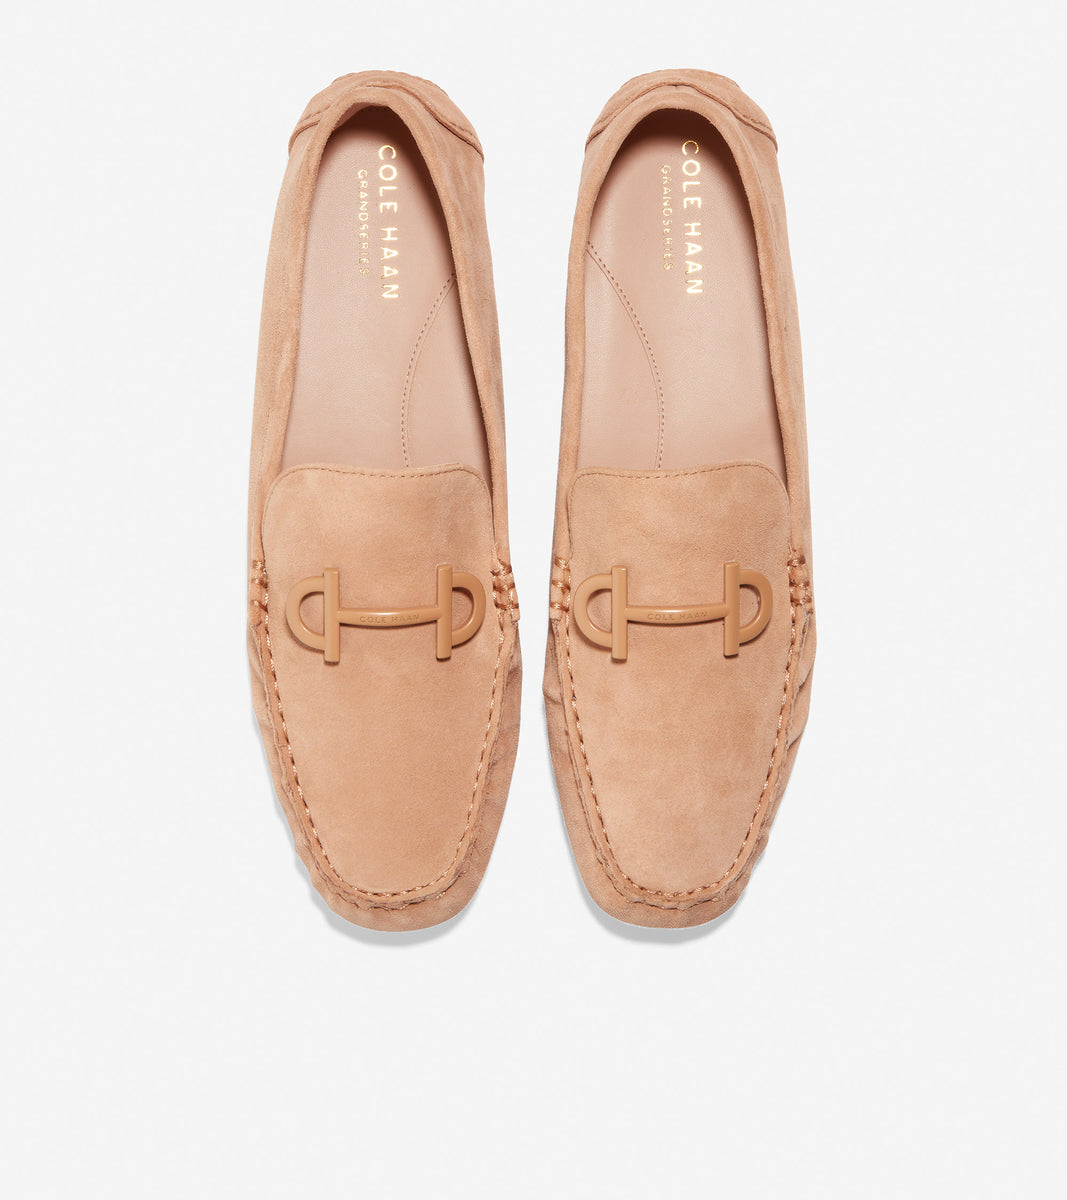 w26056-Tully Driver-Blush Tan Suede